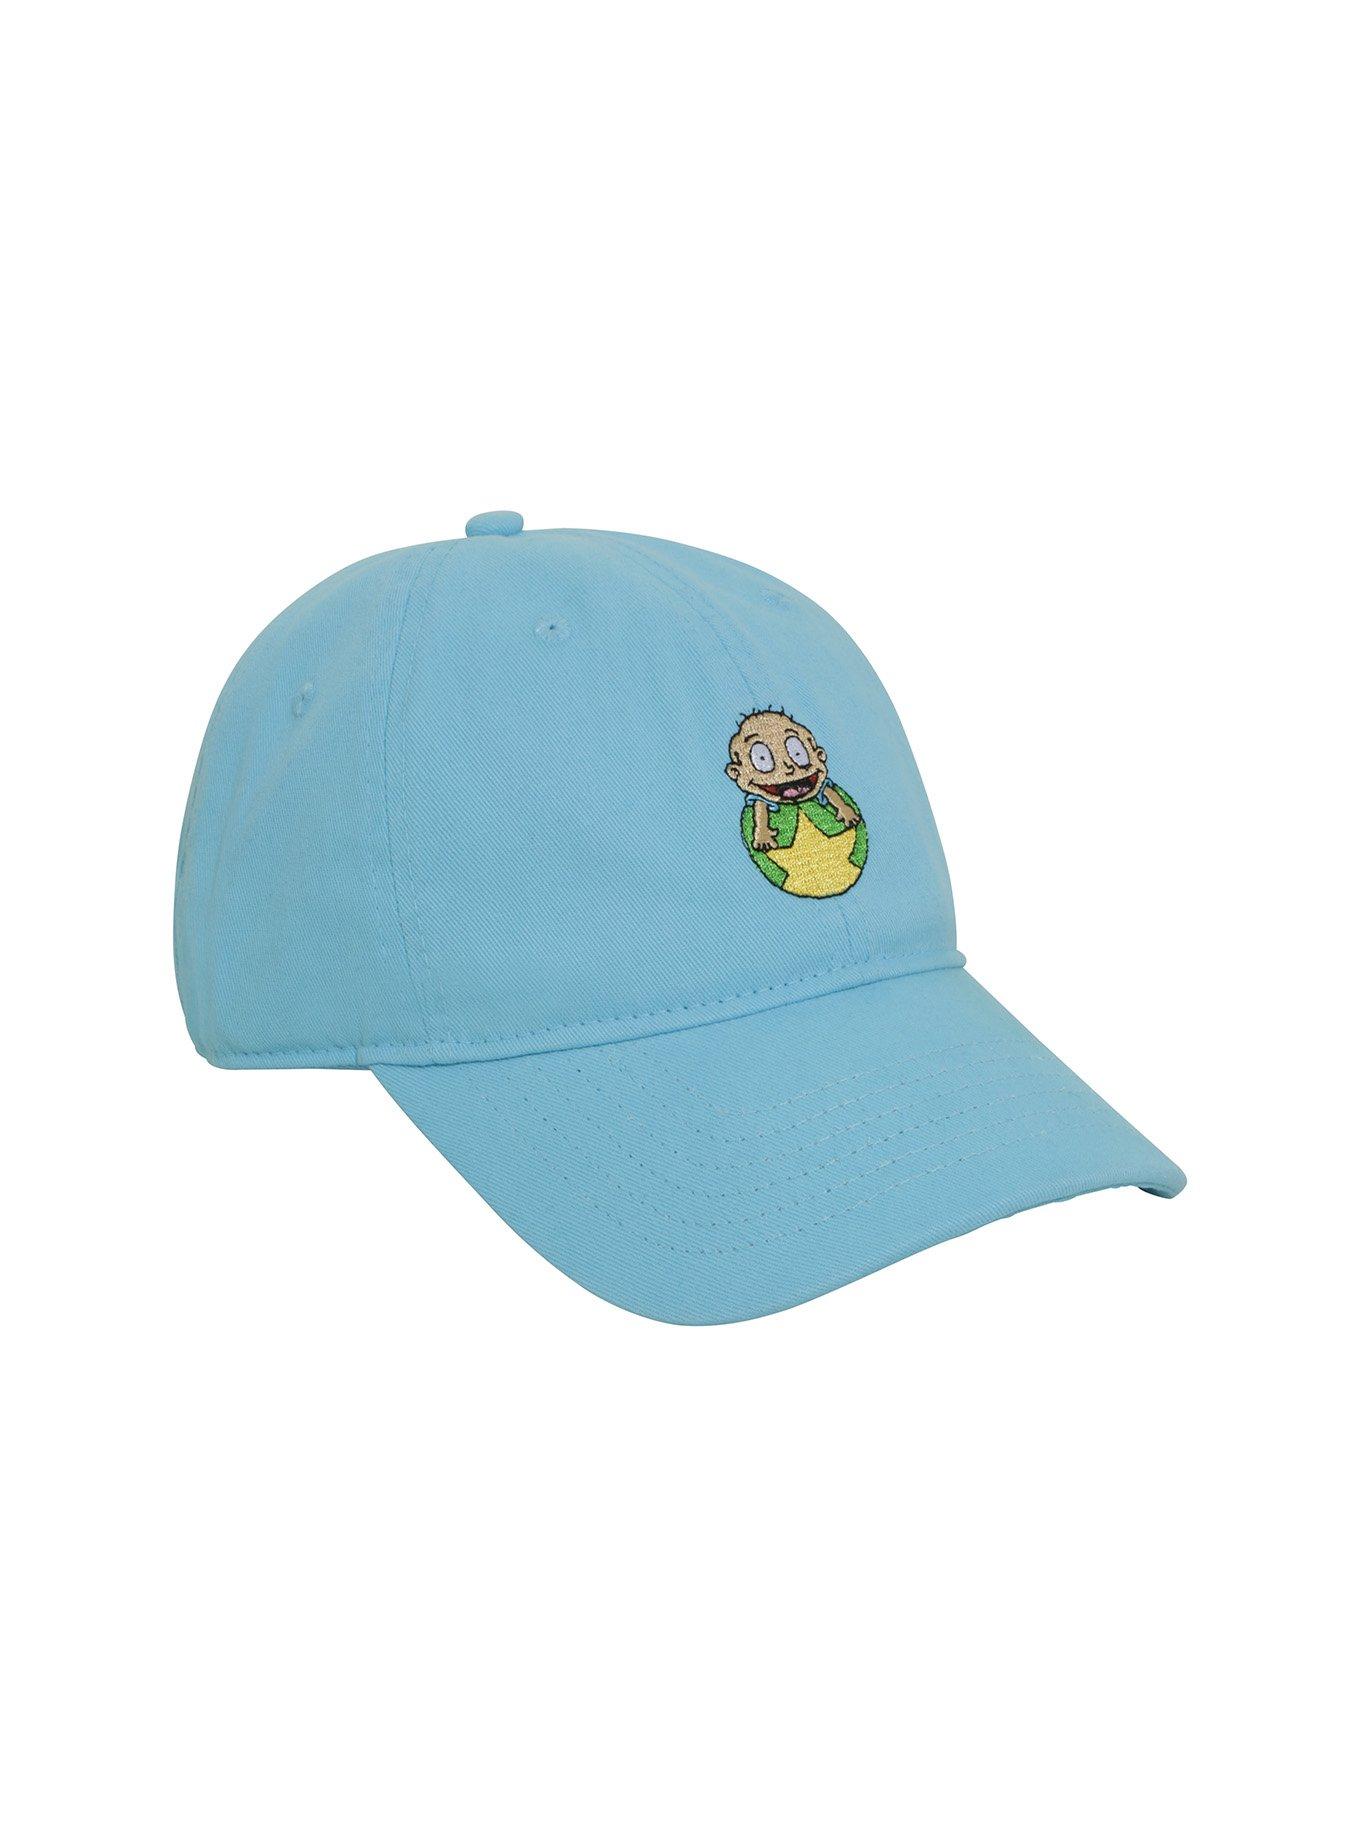 Nickelodeon Rugrats Tommy Pickles Dad Cap | Hot Topic